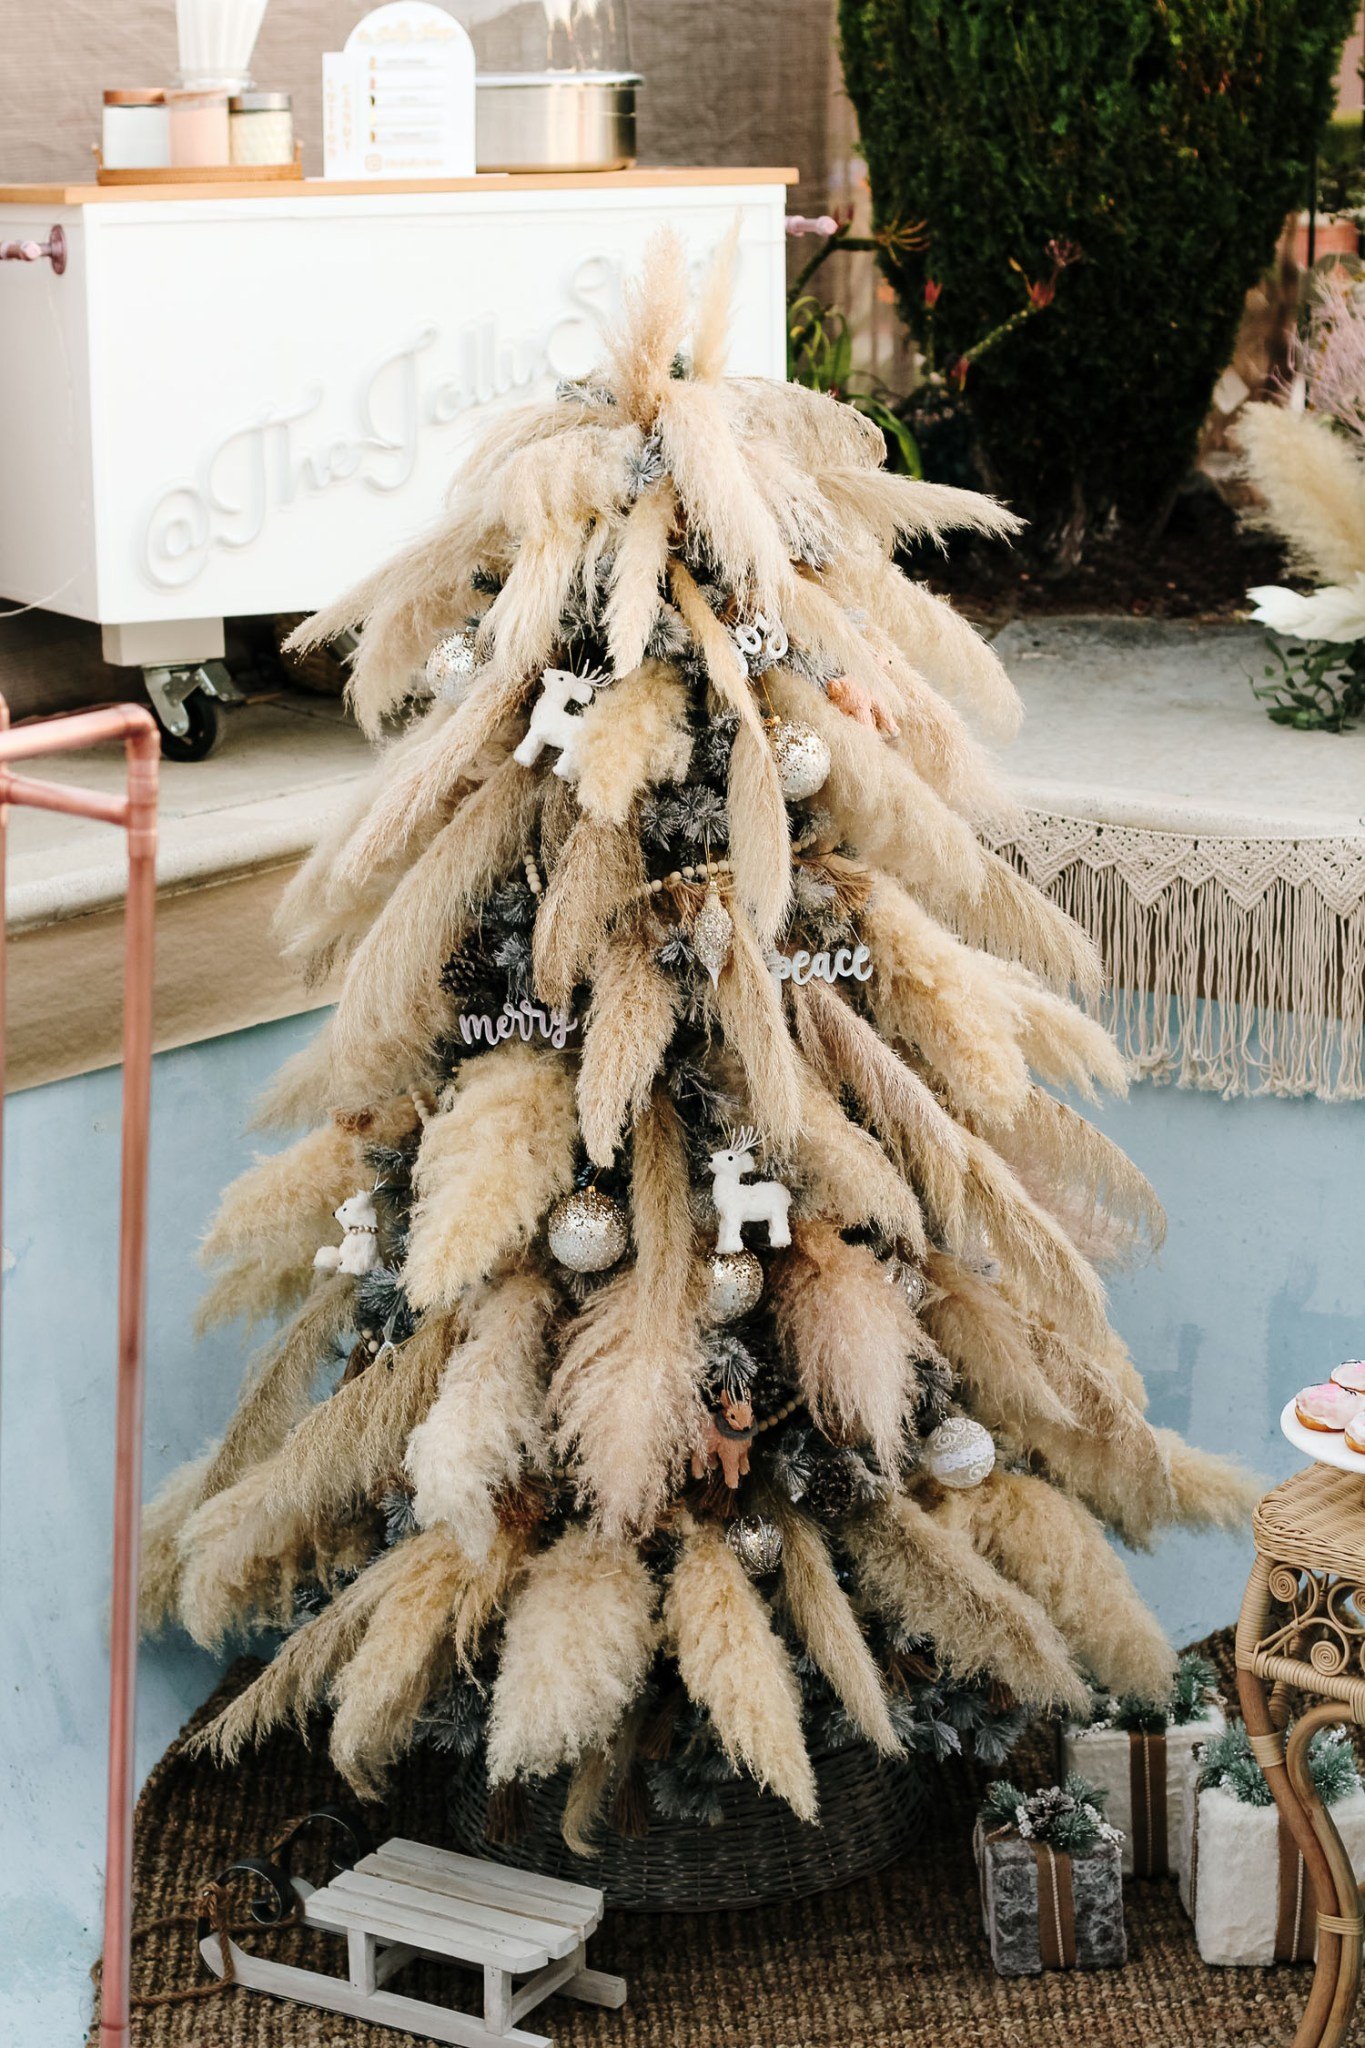 10 unexpected, out of the box Christmas tree decor ideas using